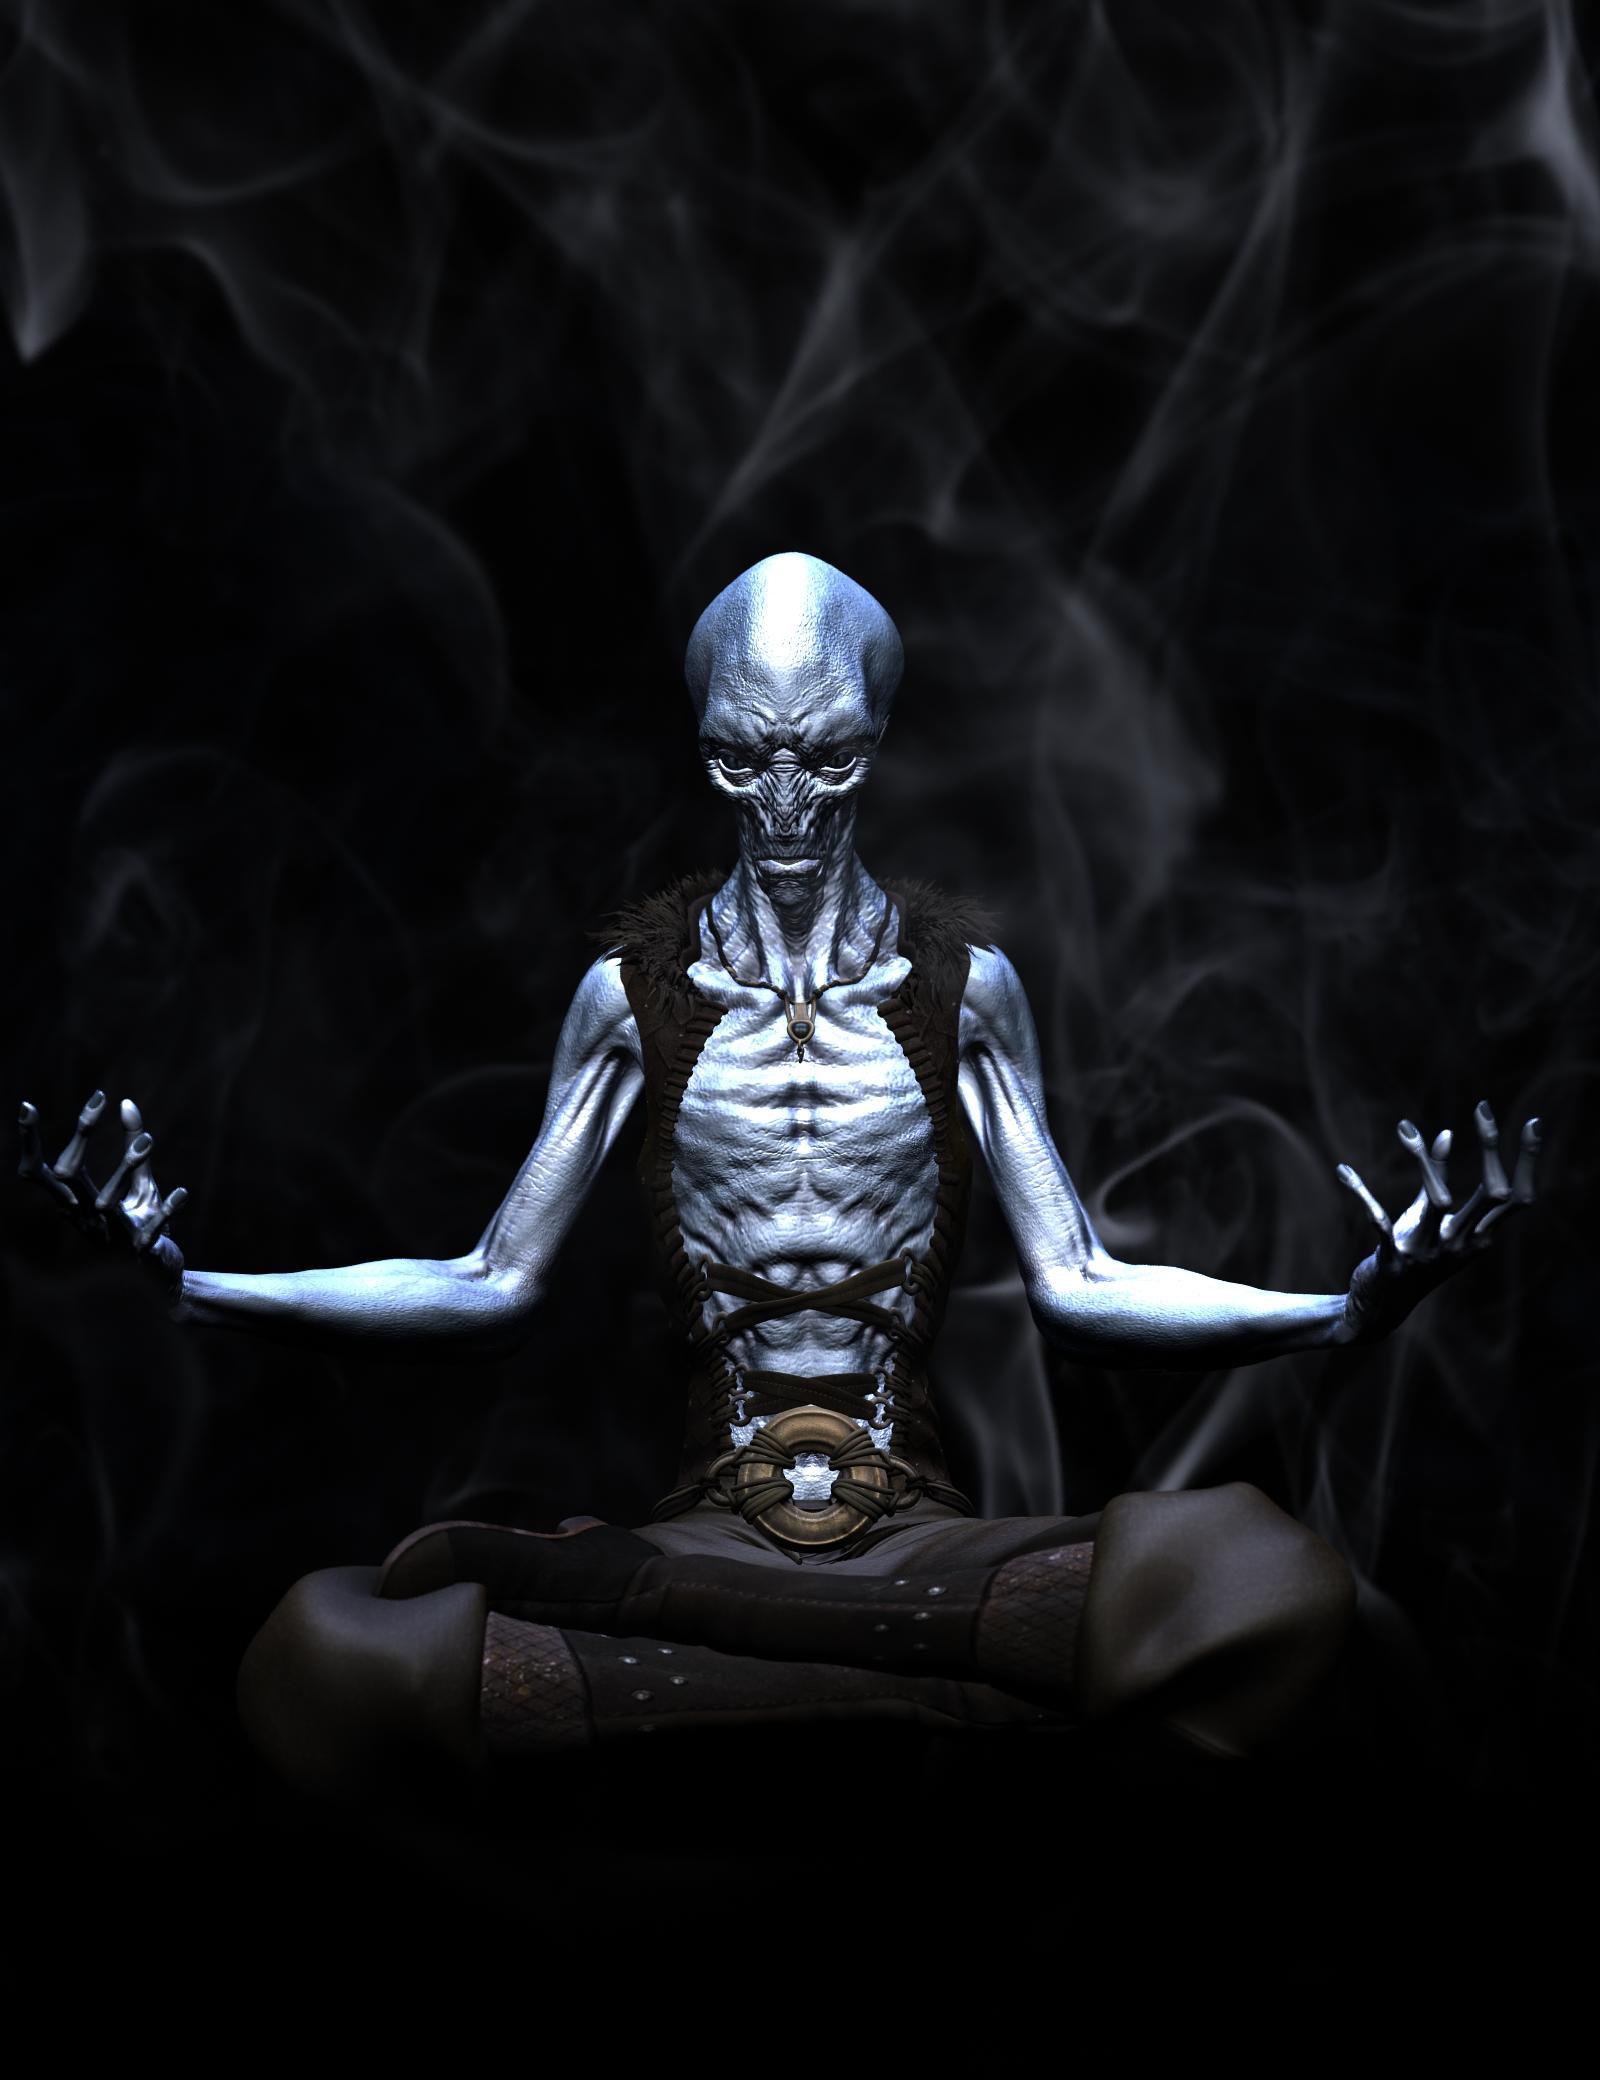 Stay Calm and Meditate, by matthew12396_b37c3d416f